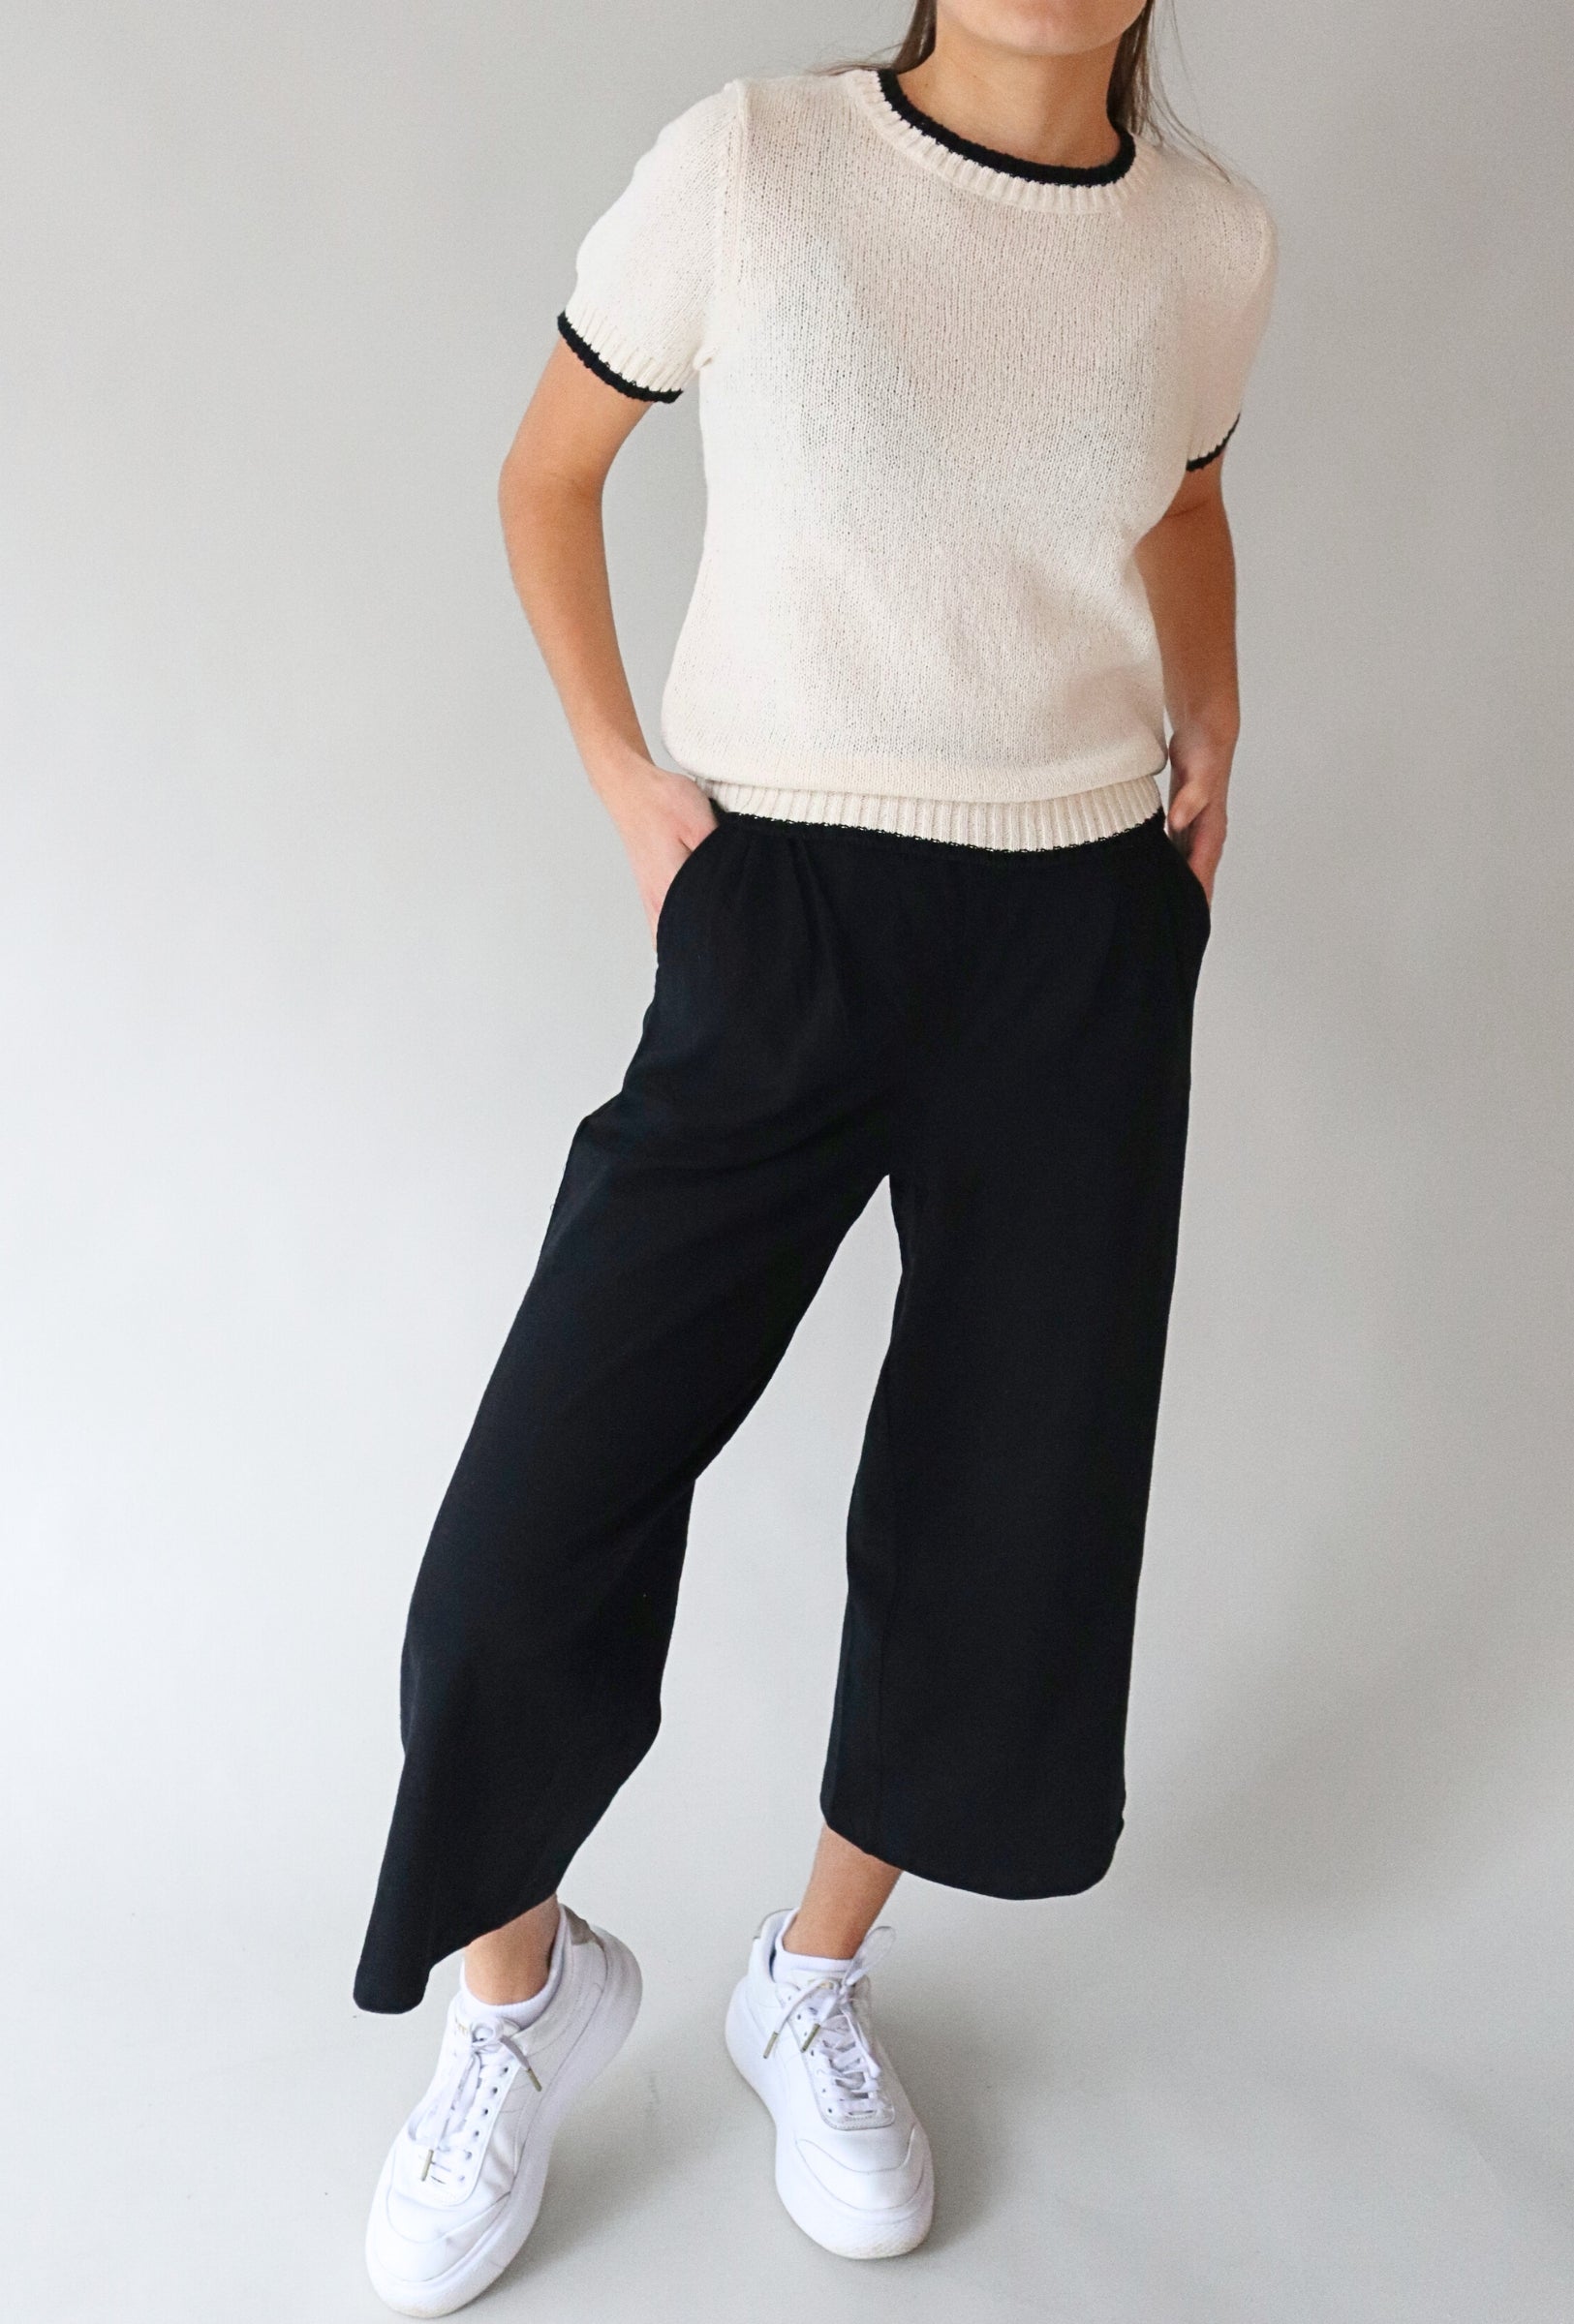 casual style black trouser